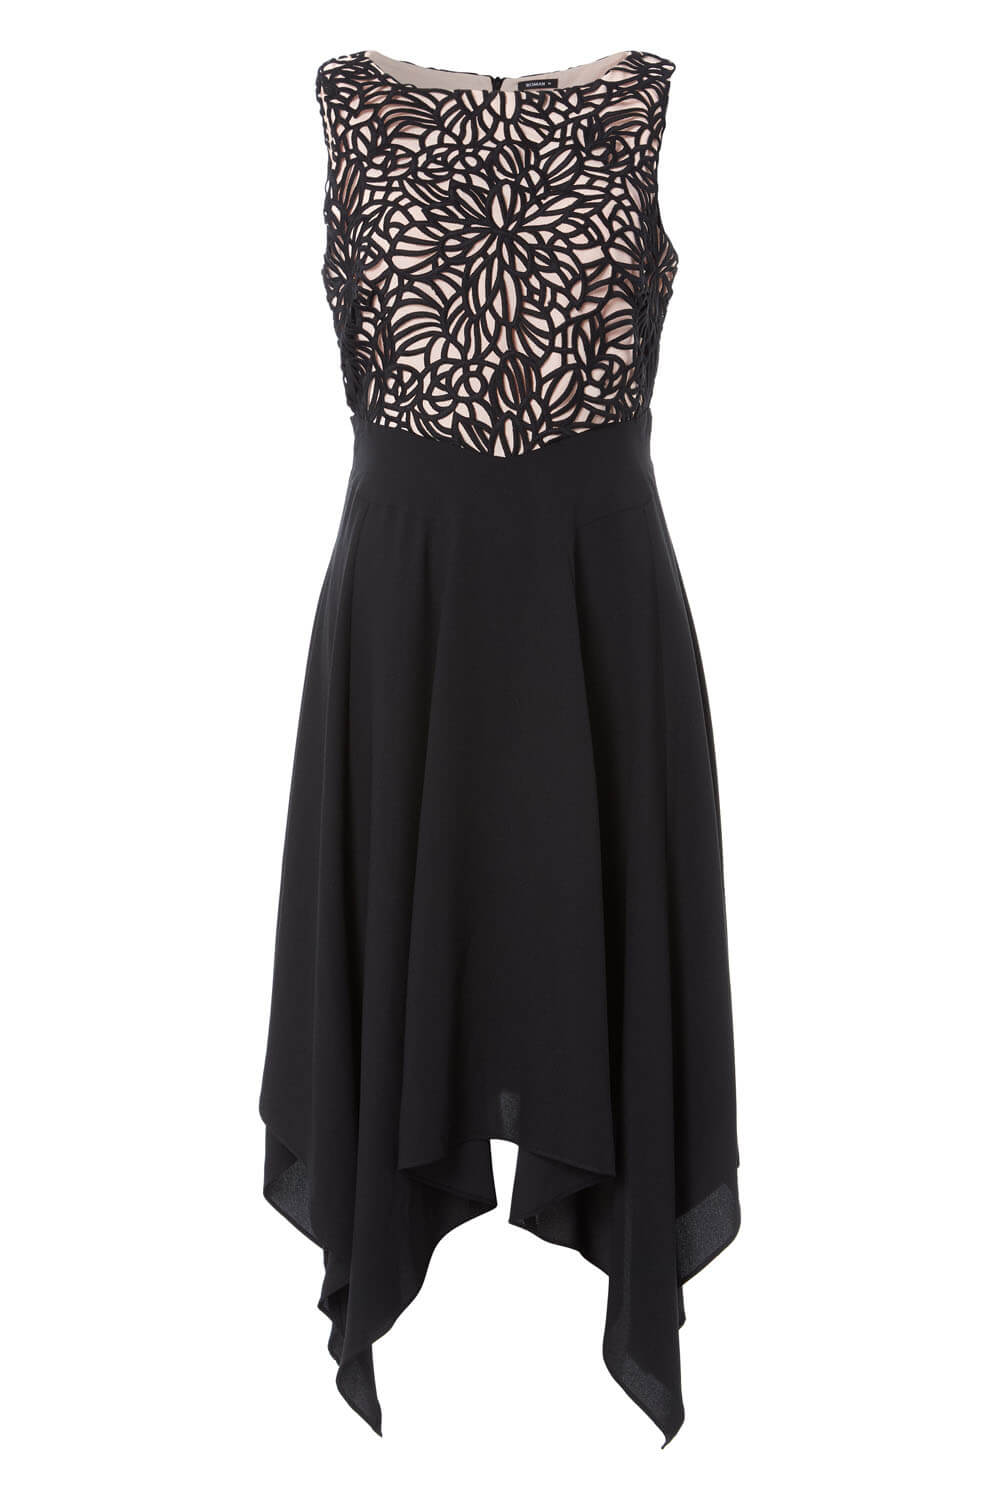 Black Hanky Hem Lace Fit and Flare Dress, Image 4 of 4